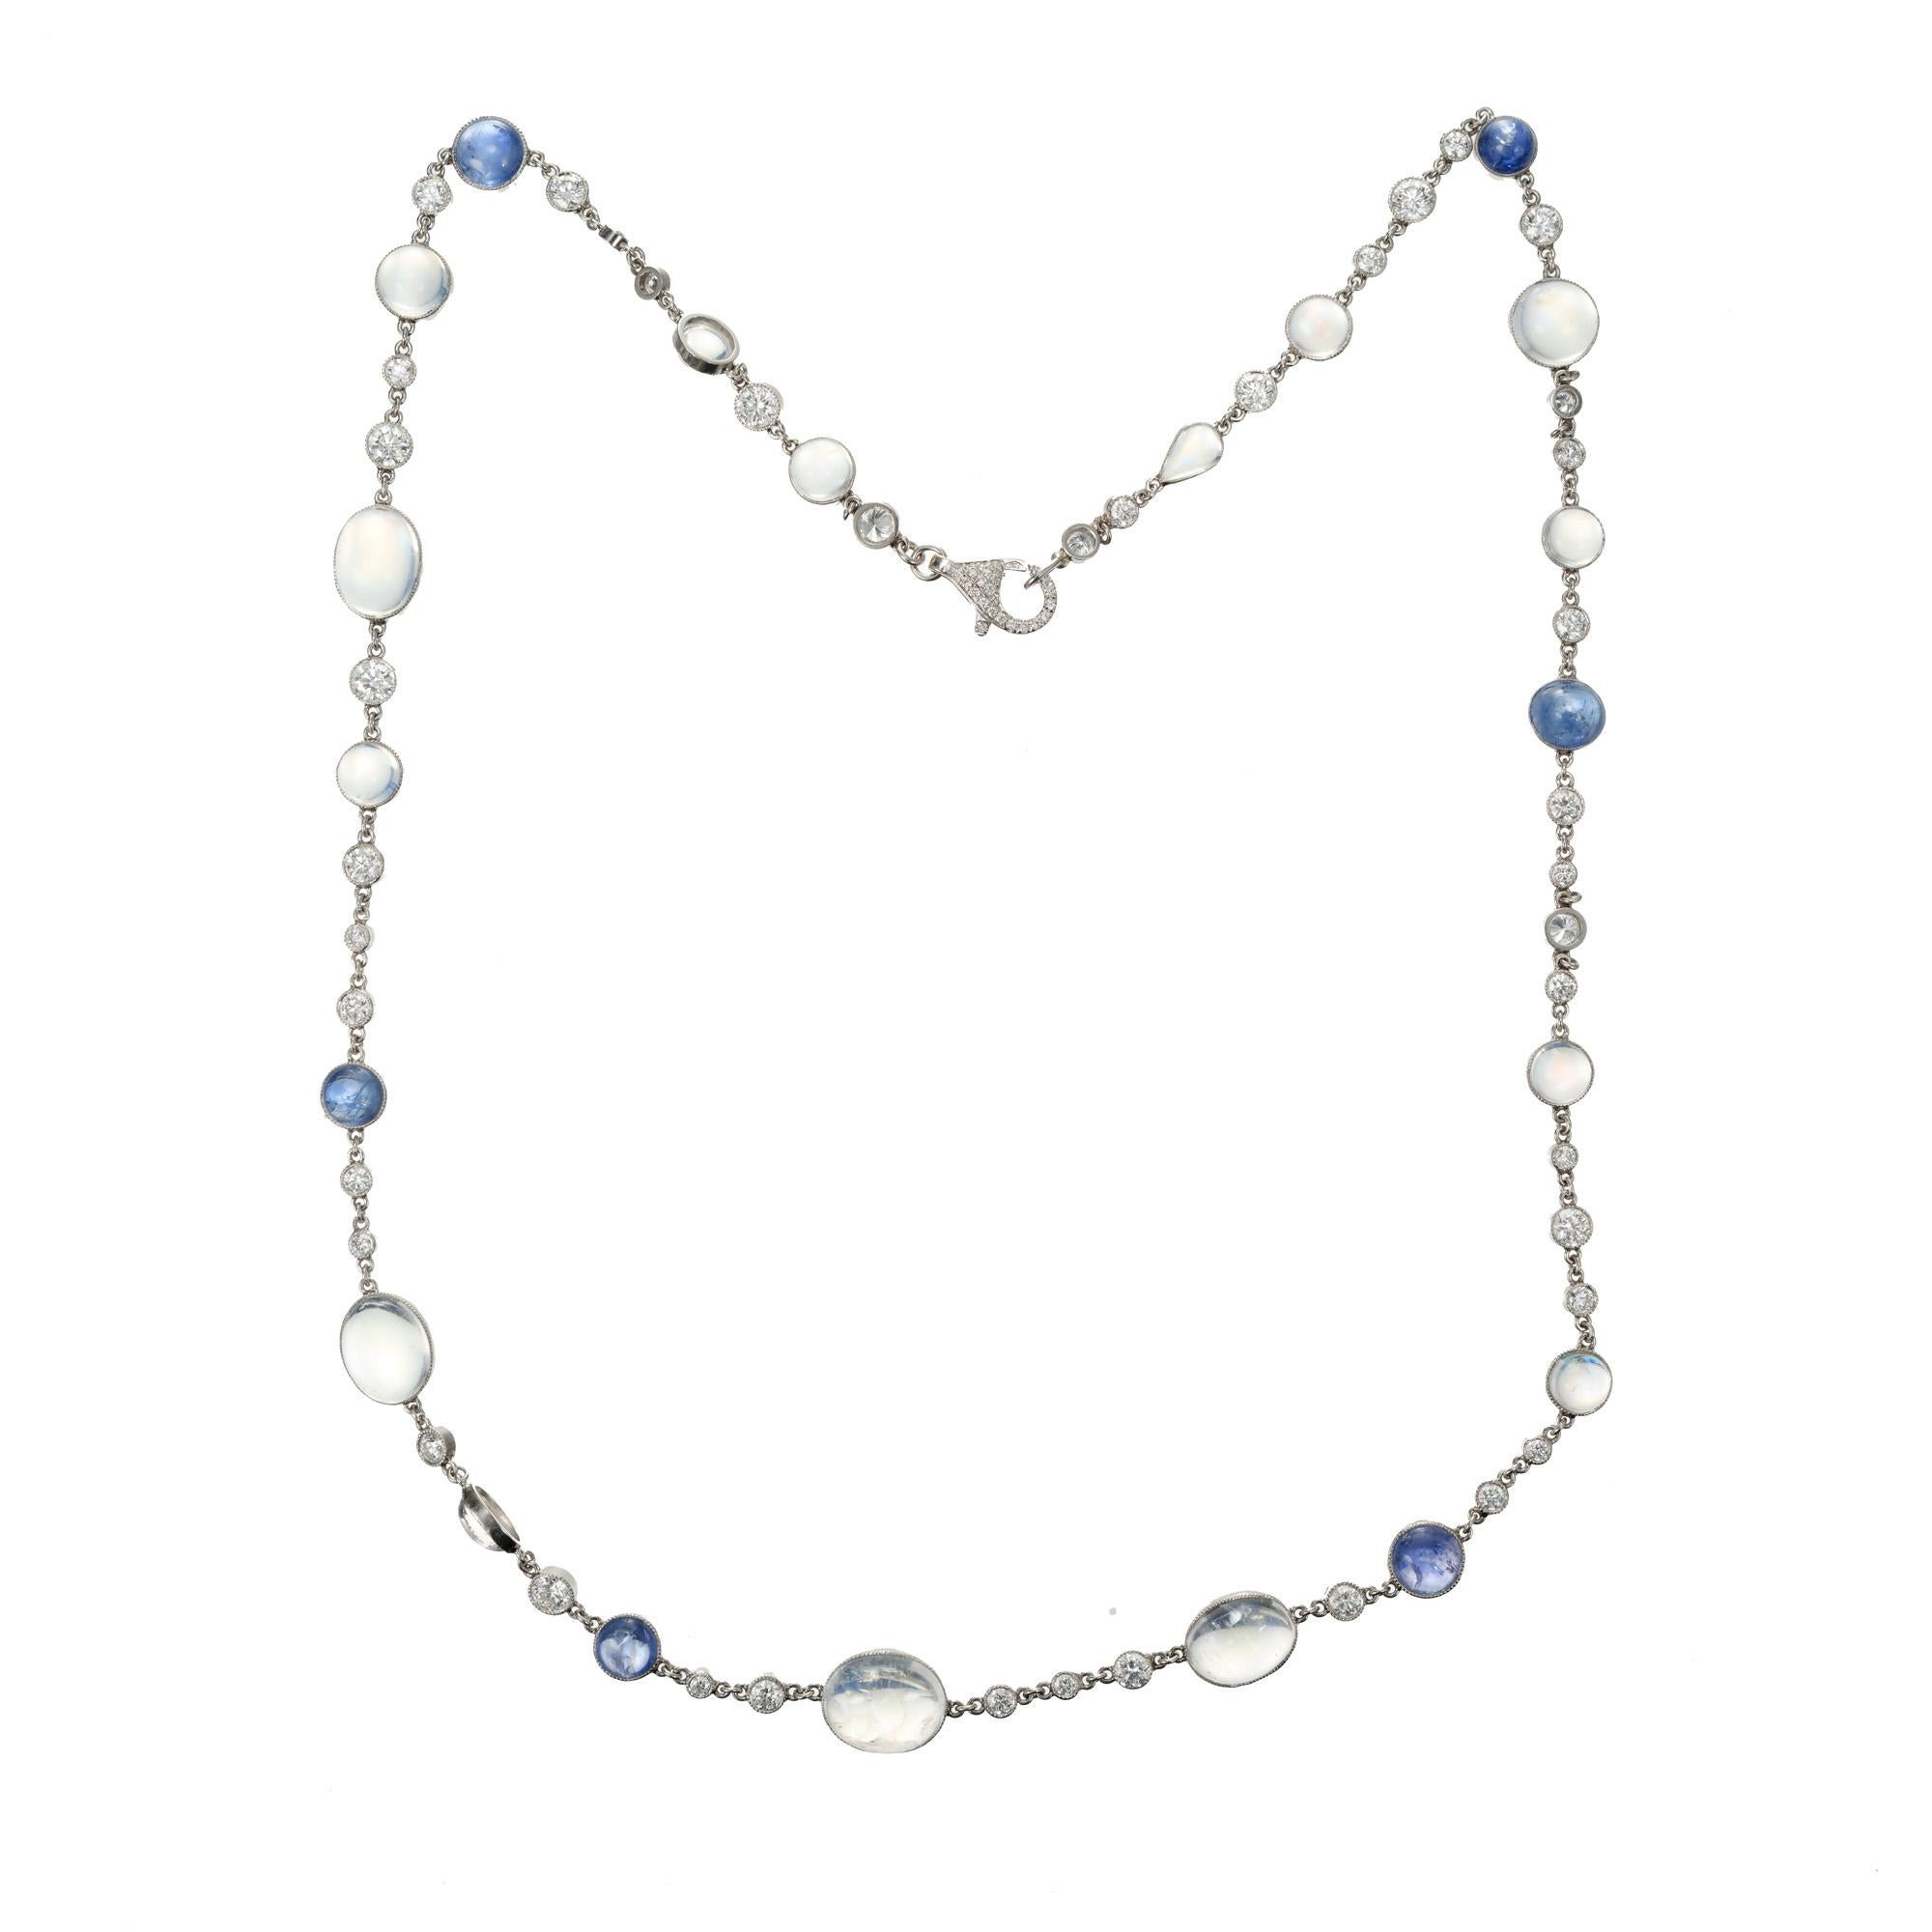 1970's Handmade moonstone and diamond necklace. 18 Inch necklace with bluish oval and round moonstones, natural cabochon round sapphires and round diamonds. 18 inch chain. 

4 rainbow bluish moonstone MI approx. 10.00cts
41 round brilliant cut